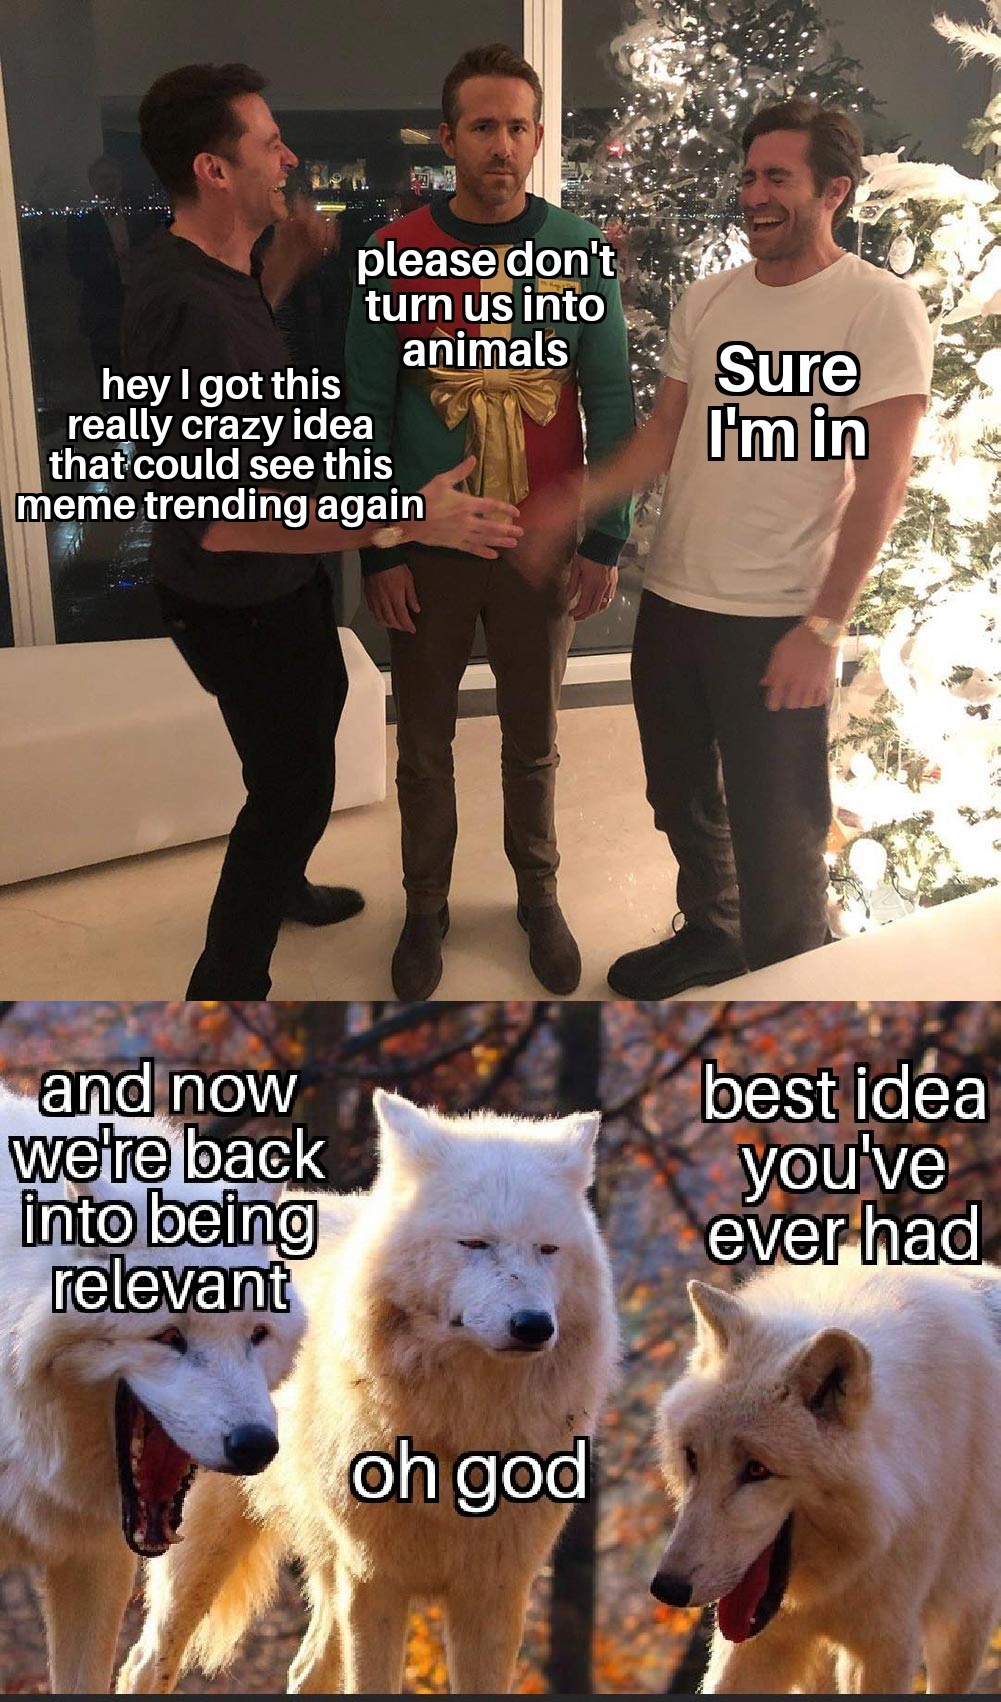 laughing wolves meme peter harry meme - please don't turn us into animals hey I got this really crazy idea that could see this meme trending again Sure I'm in and now we're back into being relevant best idea you've ever had oh god